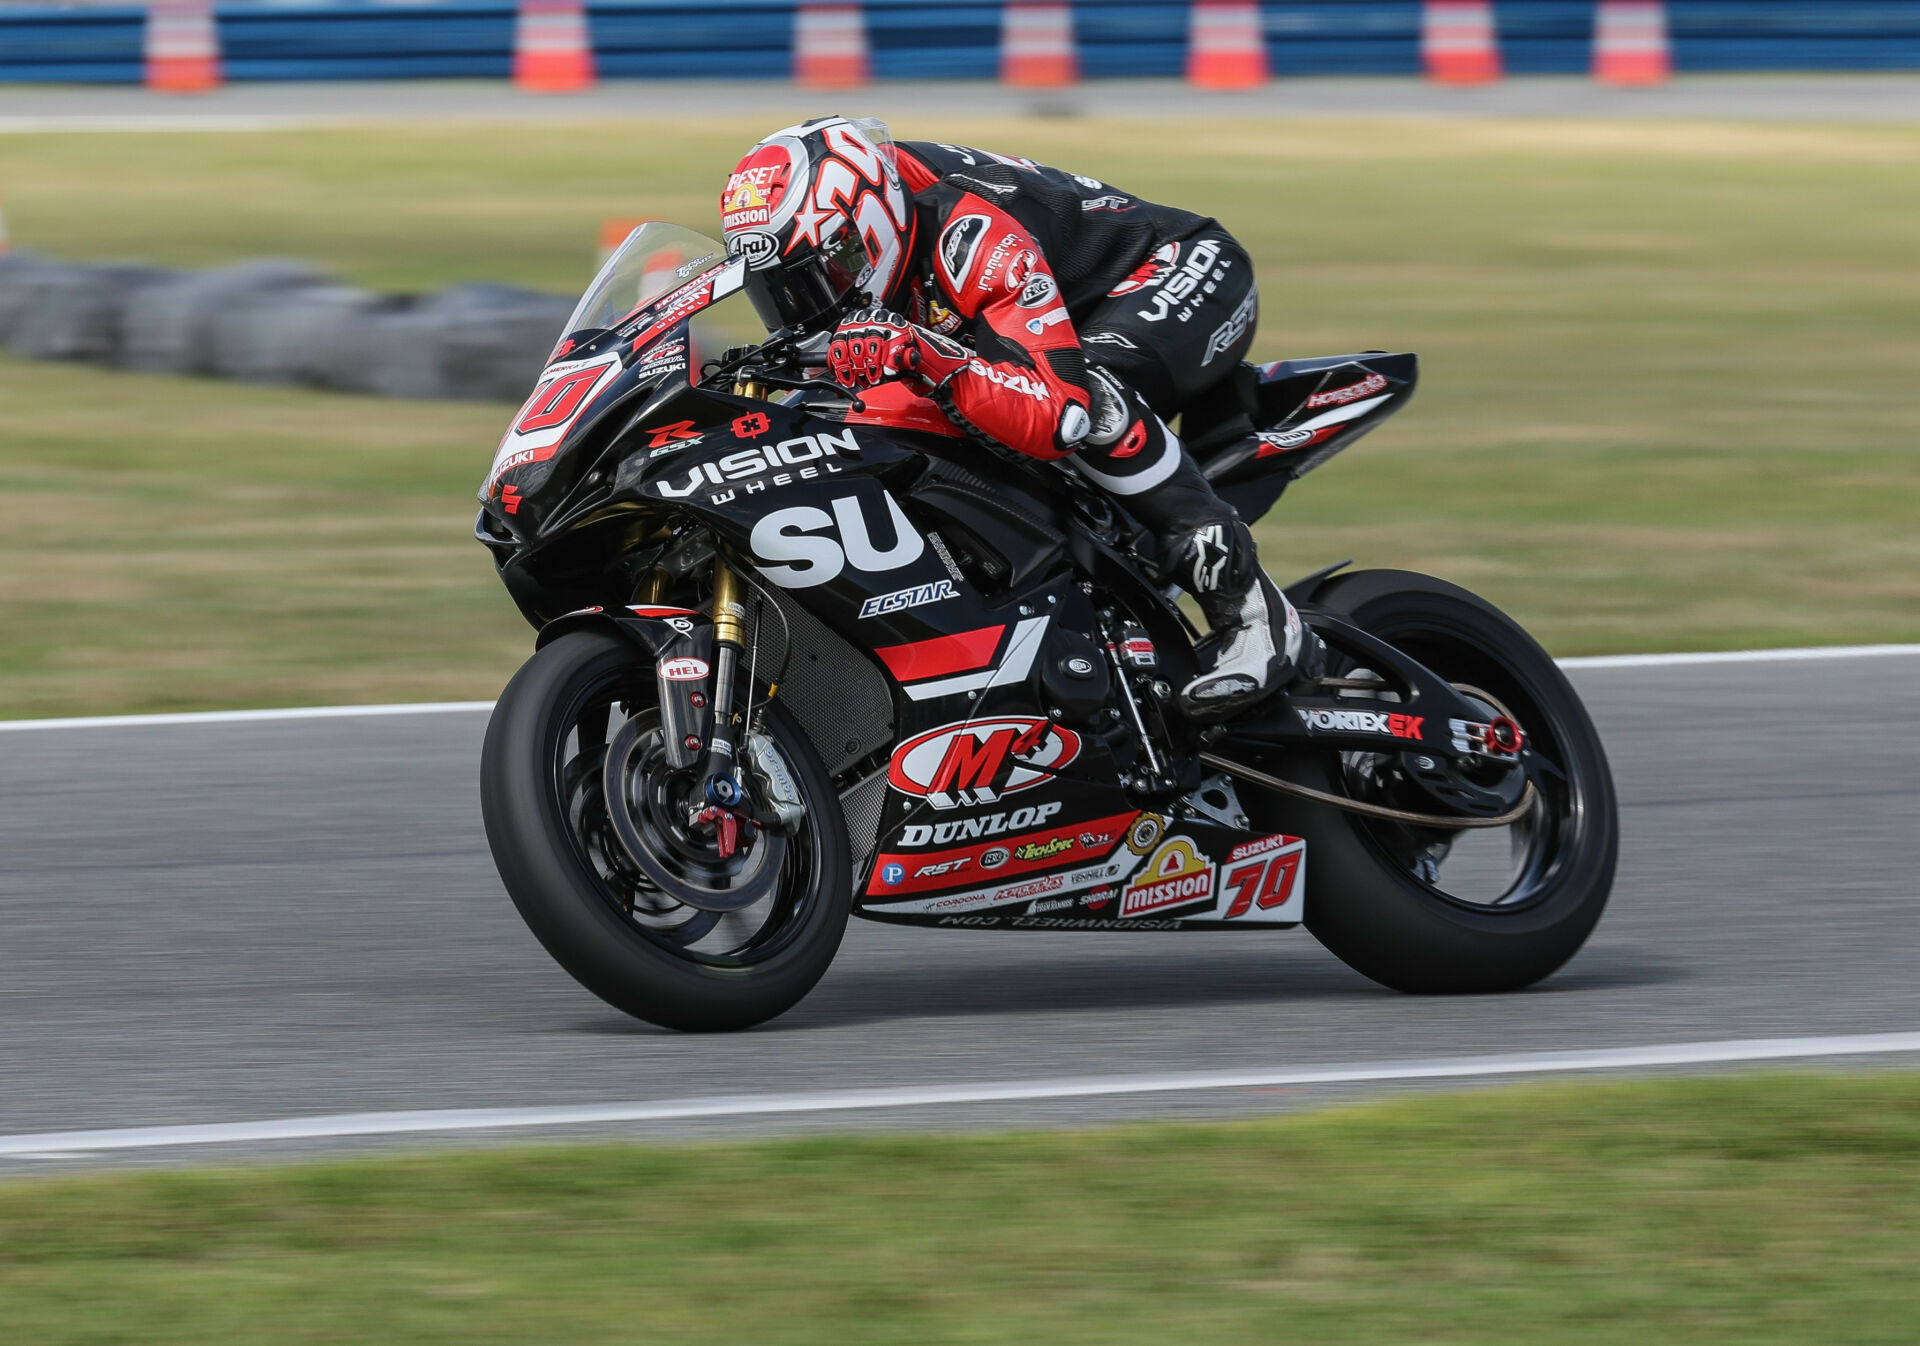 Tyler Scott (70) took the pole and raced to a second-place finish in the 82nd running of the Daytona 200. Photo by Brian J. Nelson, courtesy Suzuki Motor USA.